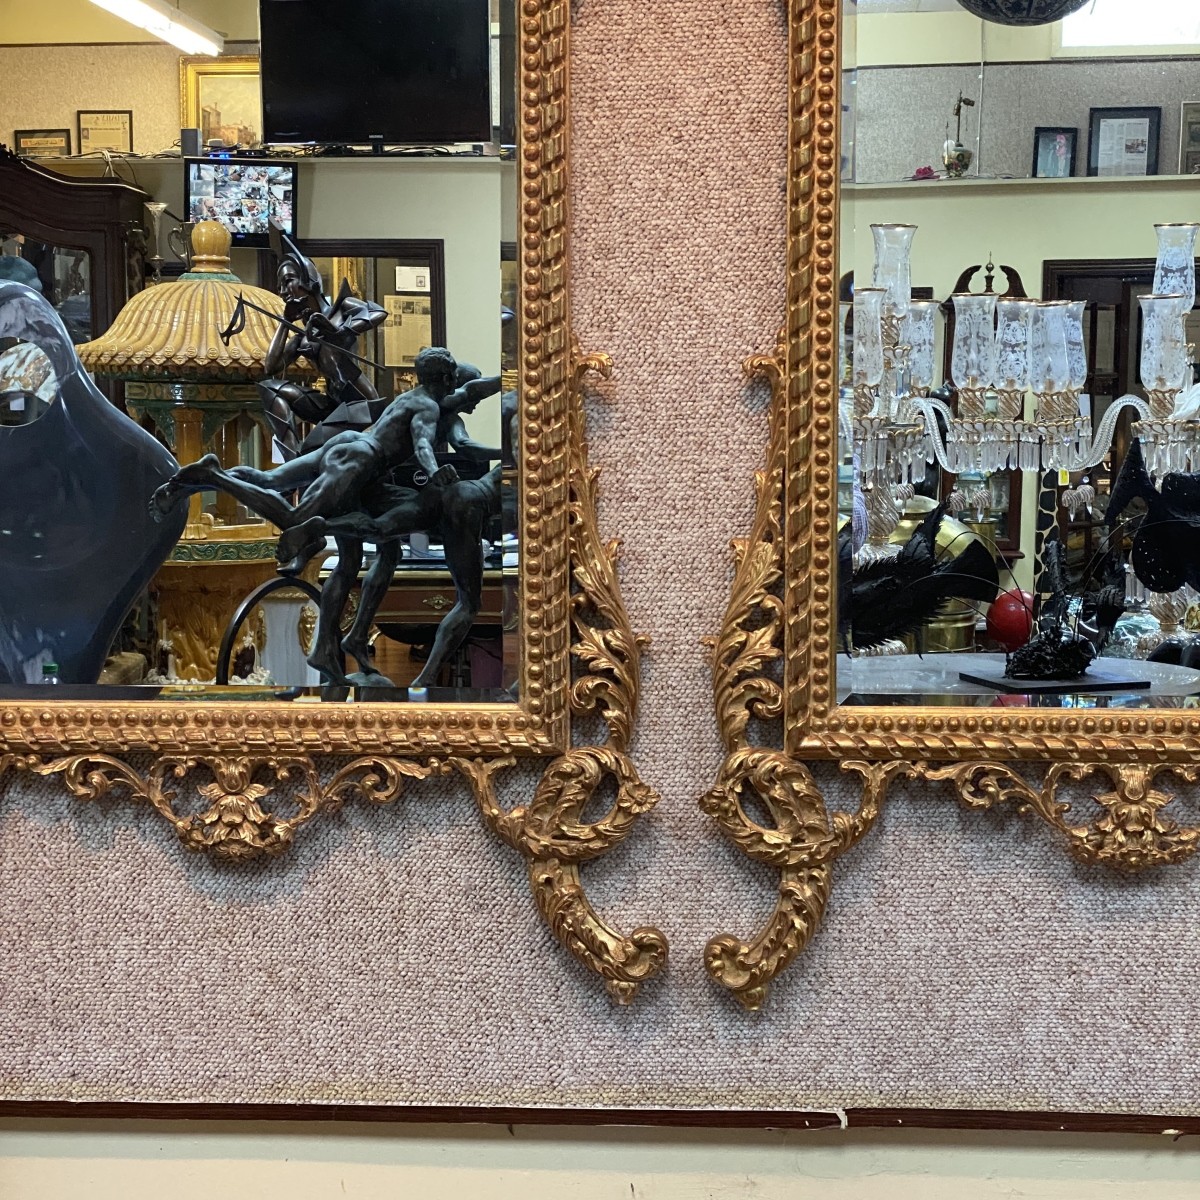 Pair of Neo-classical style Mirrors